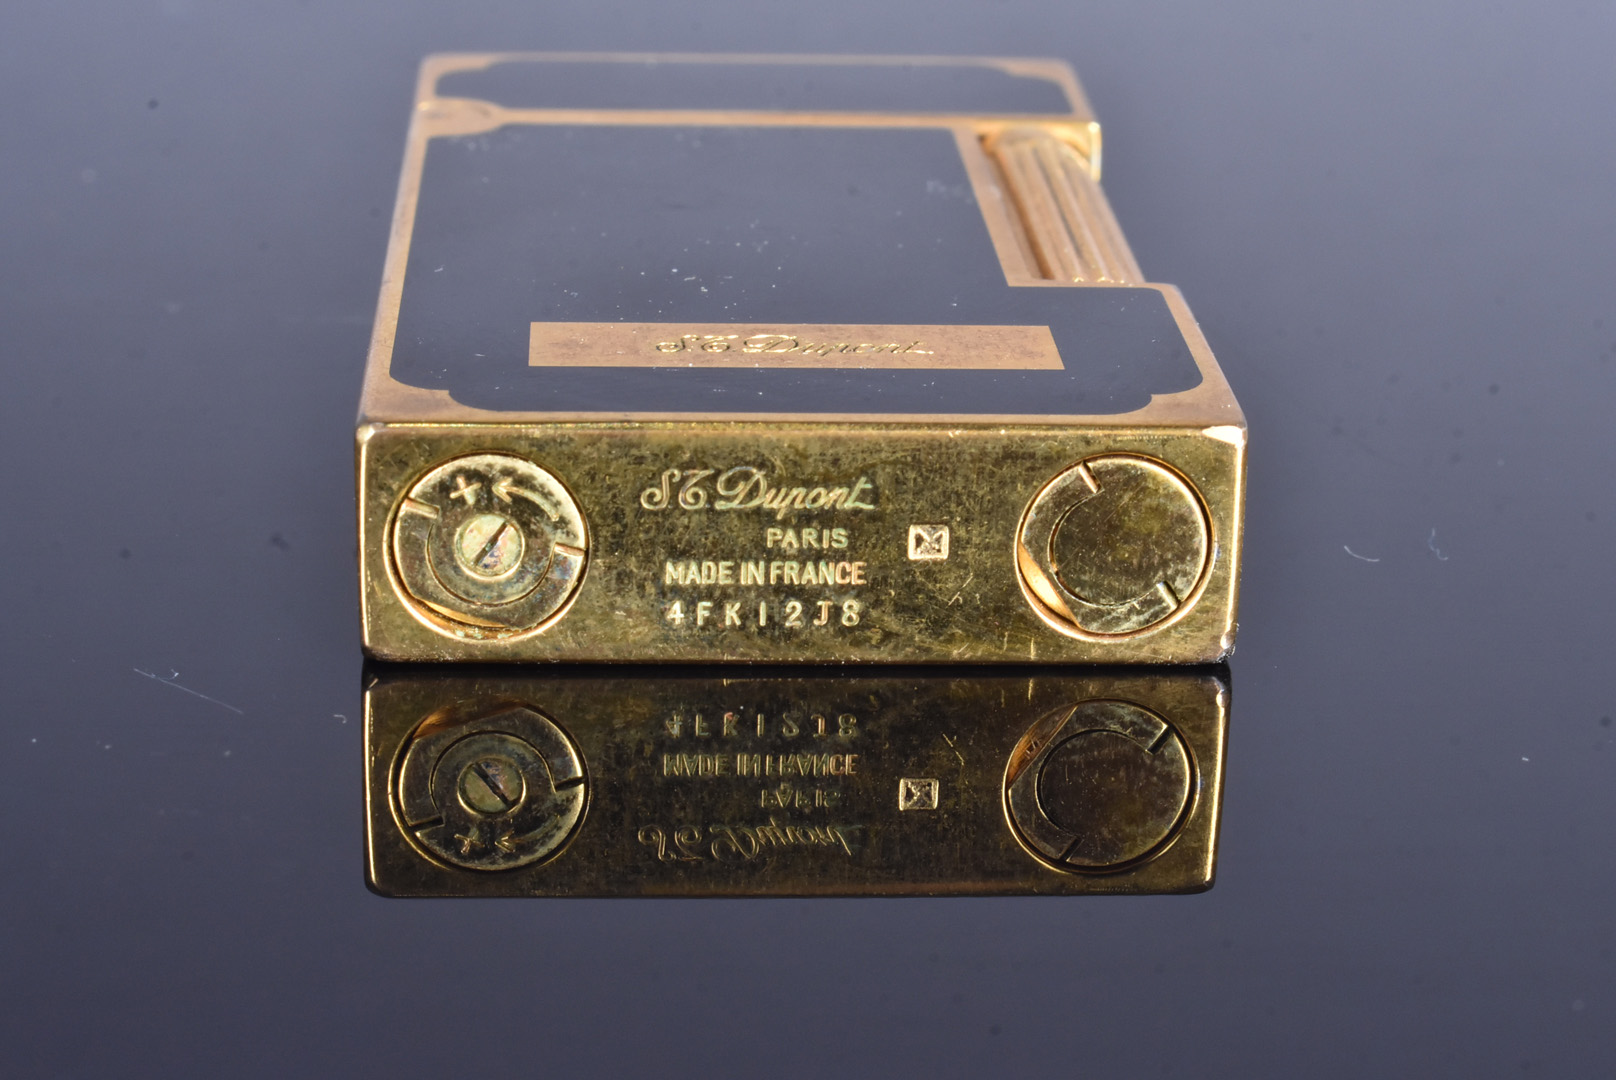 Three reproduction Dupont yellow metal pocket lighters, one with engine turned design, one with - Image 4 of 4